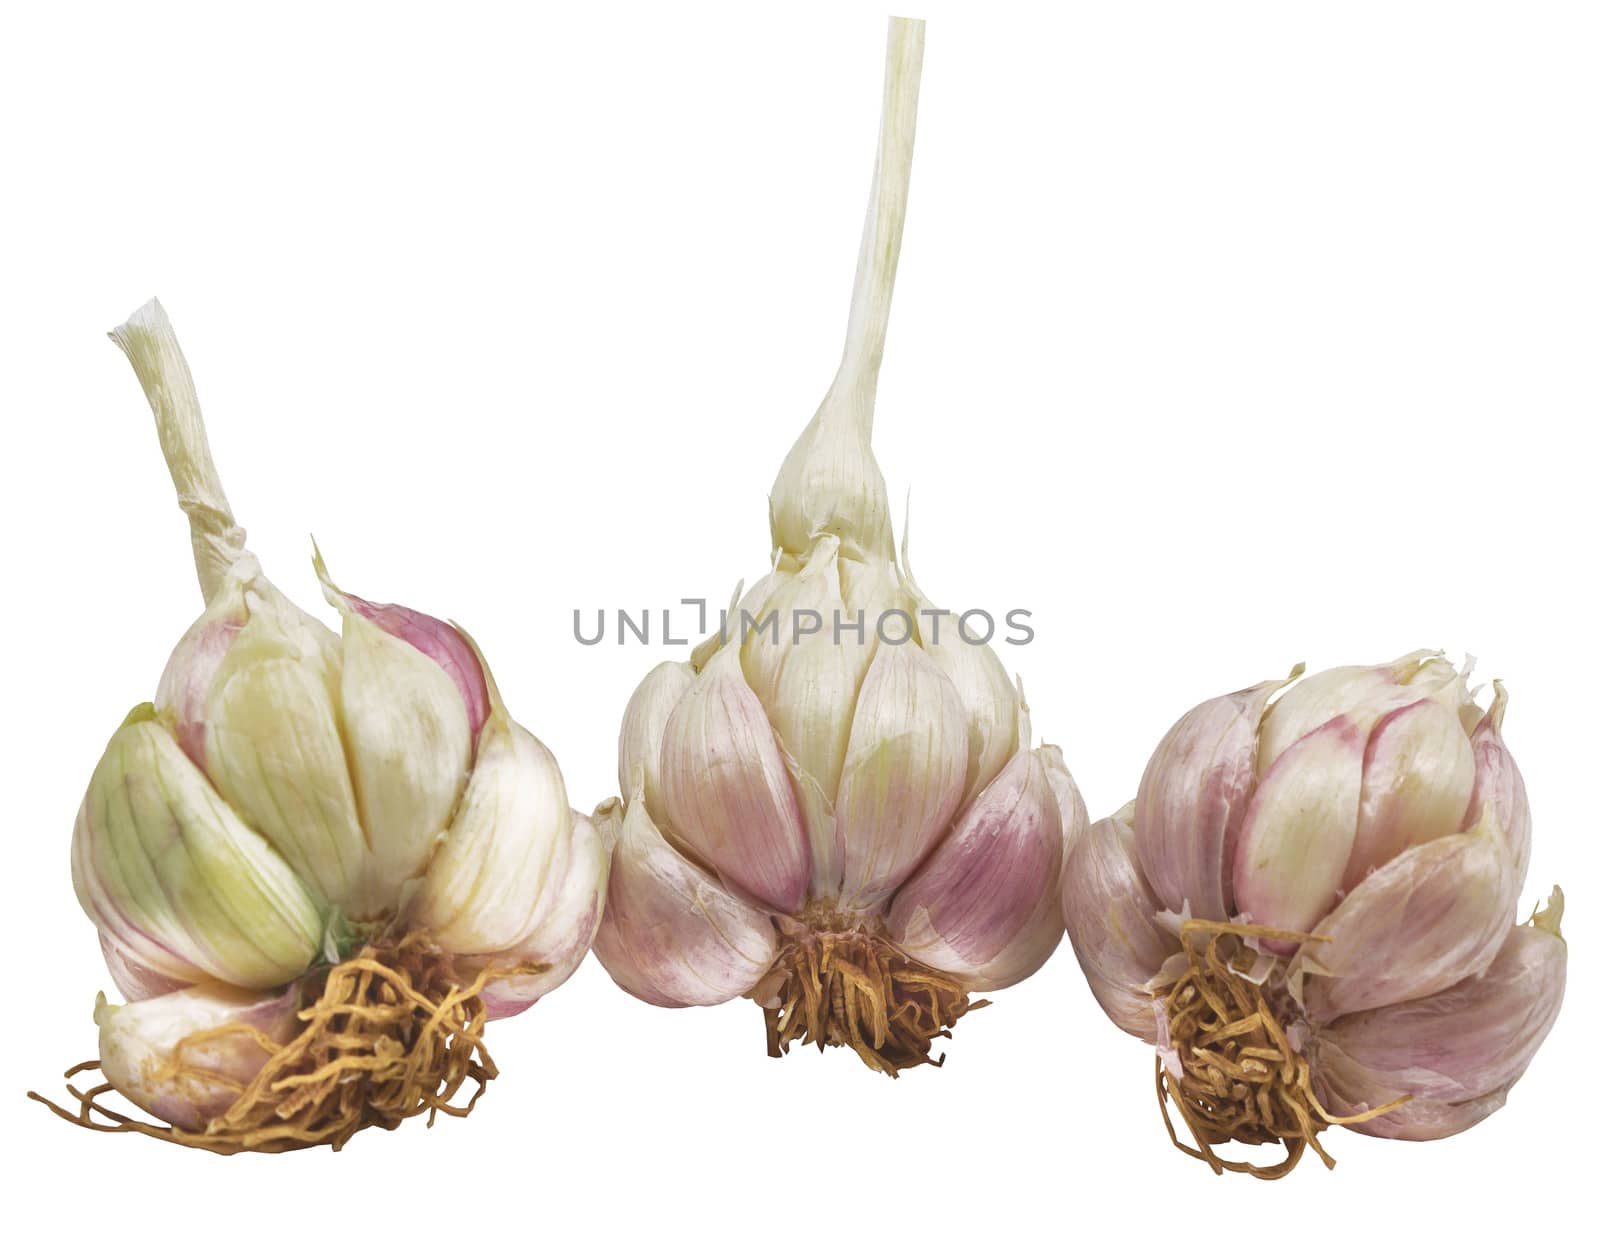 Garlic and root isolated on white background by sutipp11